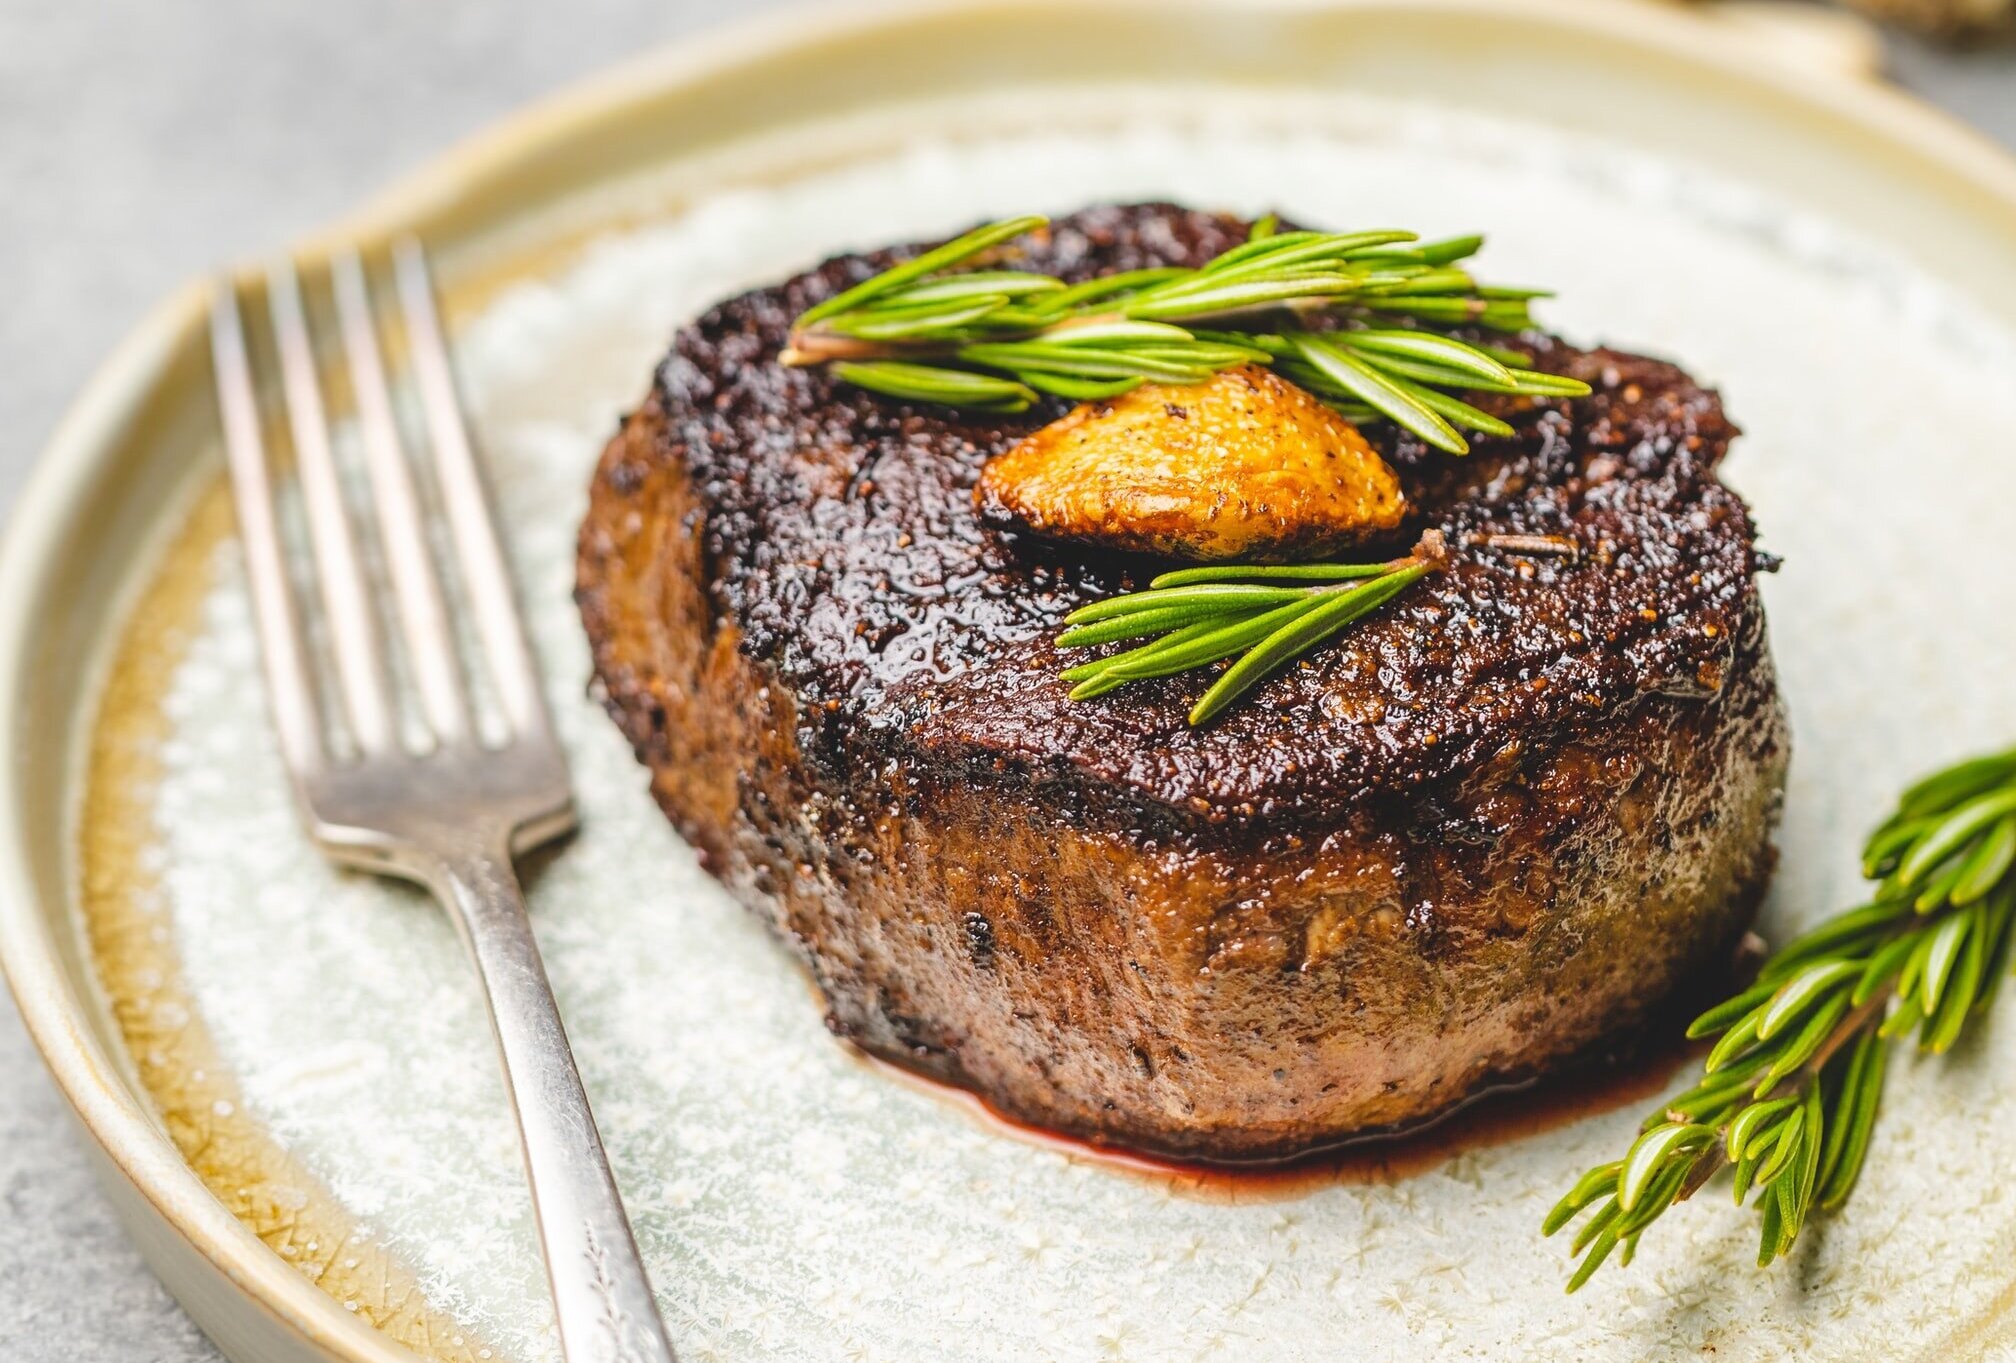 Grilled round steak seasoned with rosemary leaves.